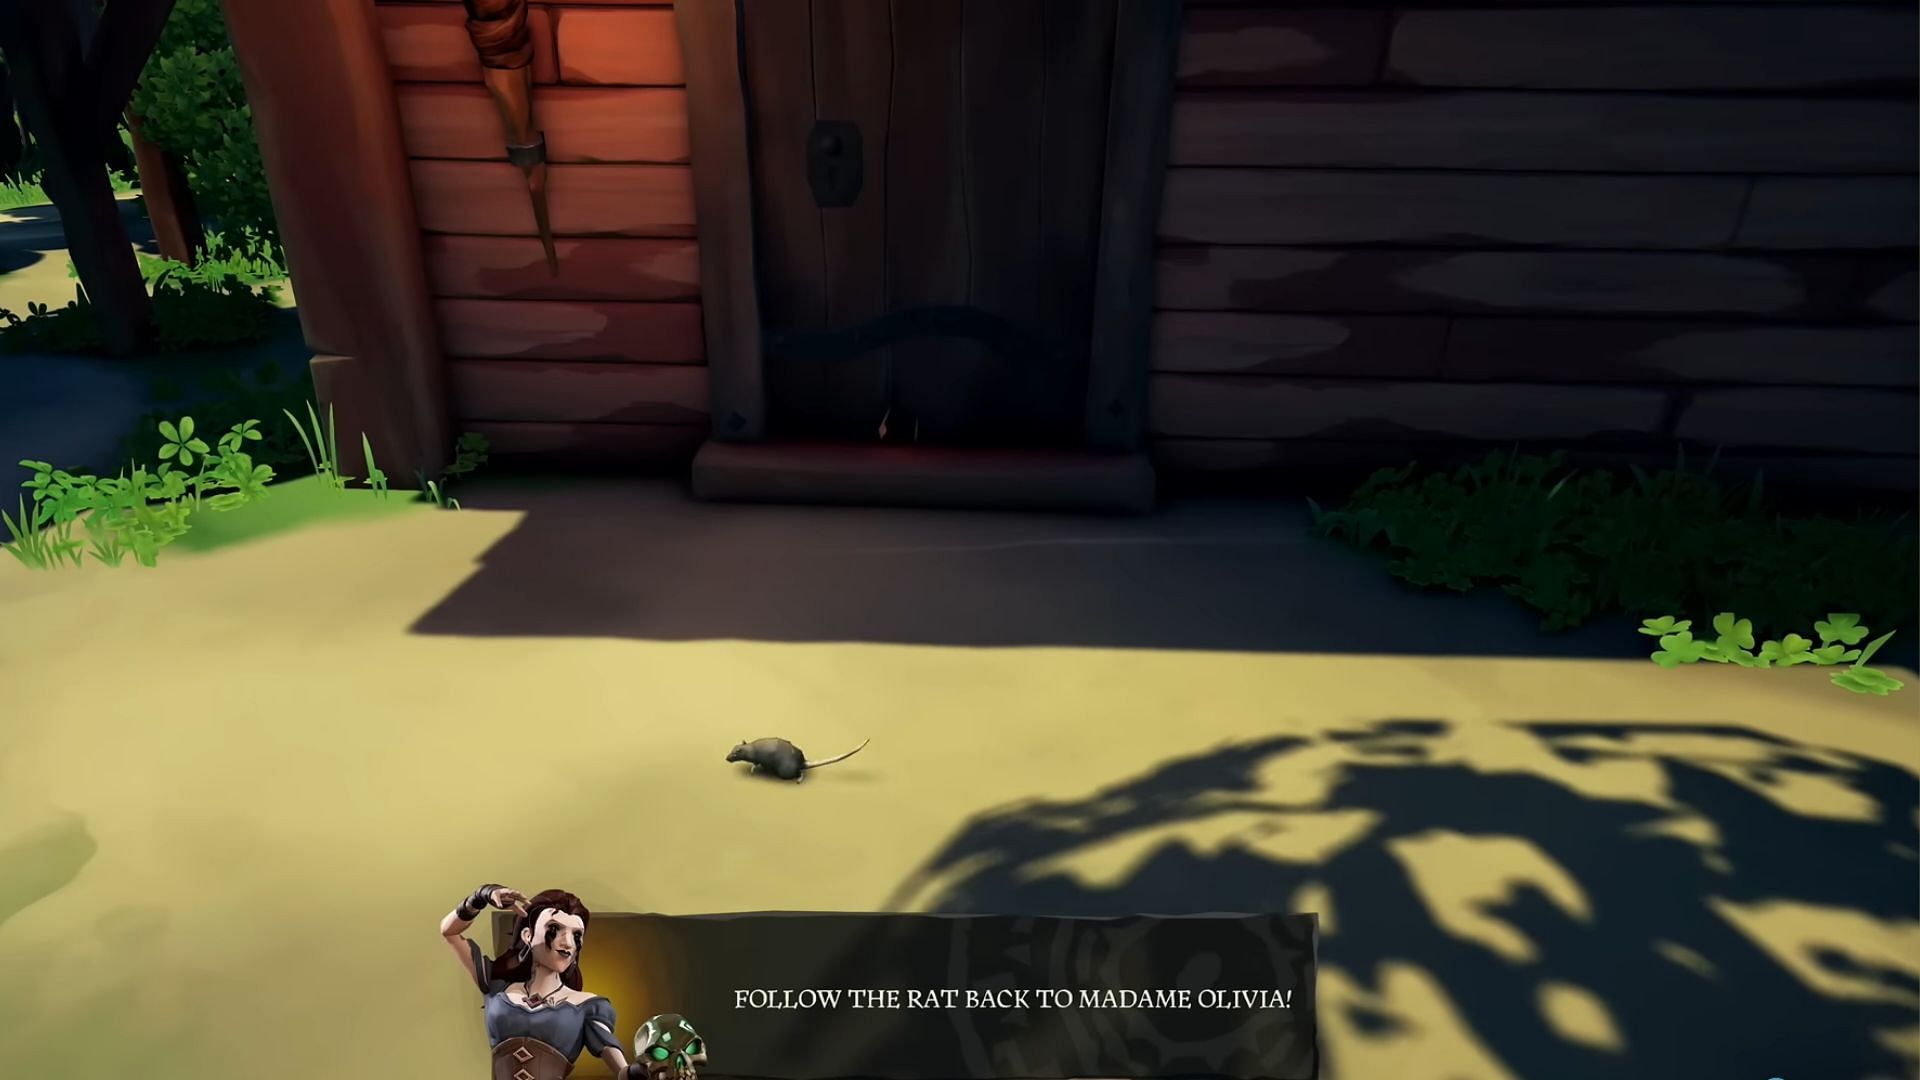 You must follow this rat back towards Madame Olivia (Image via Sea of Thieves)